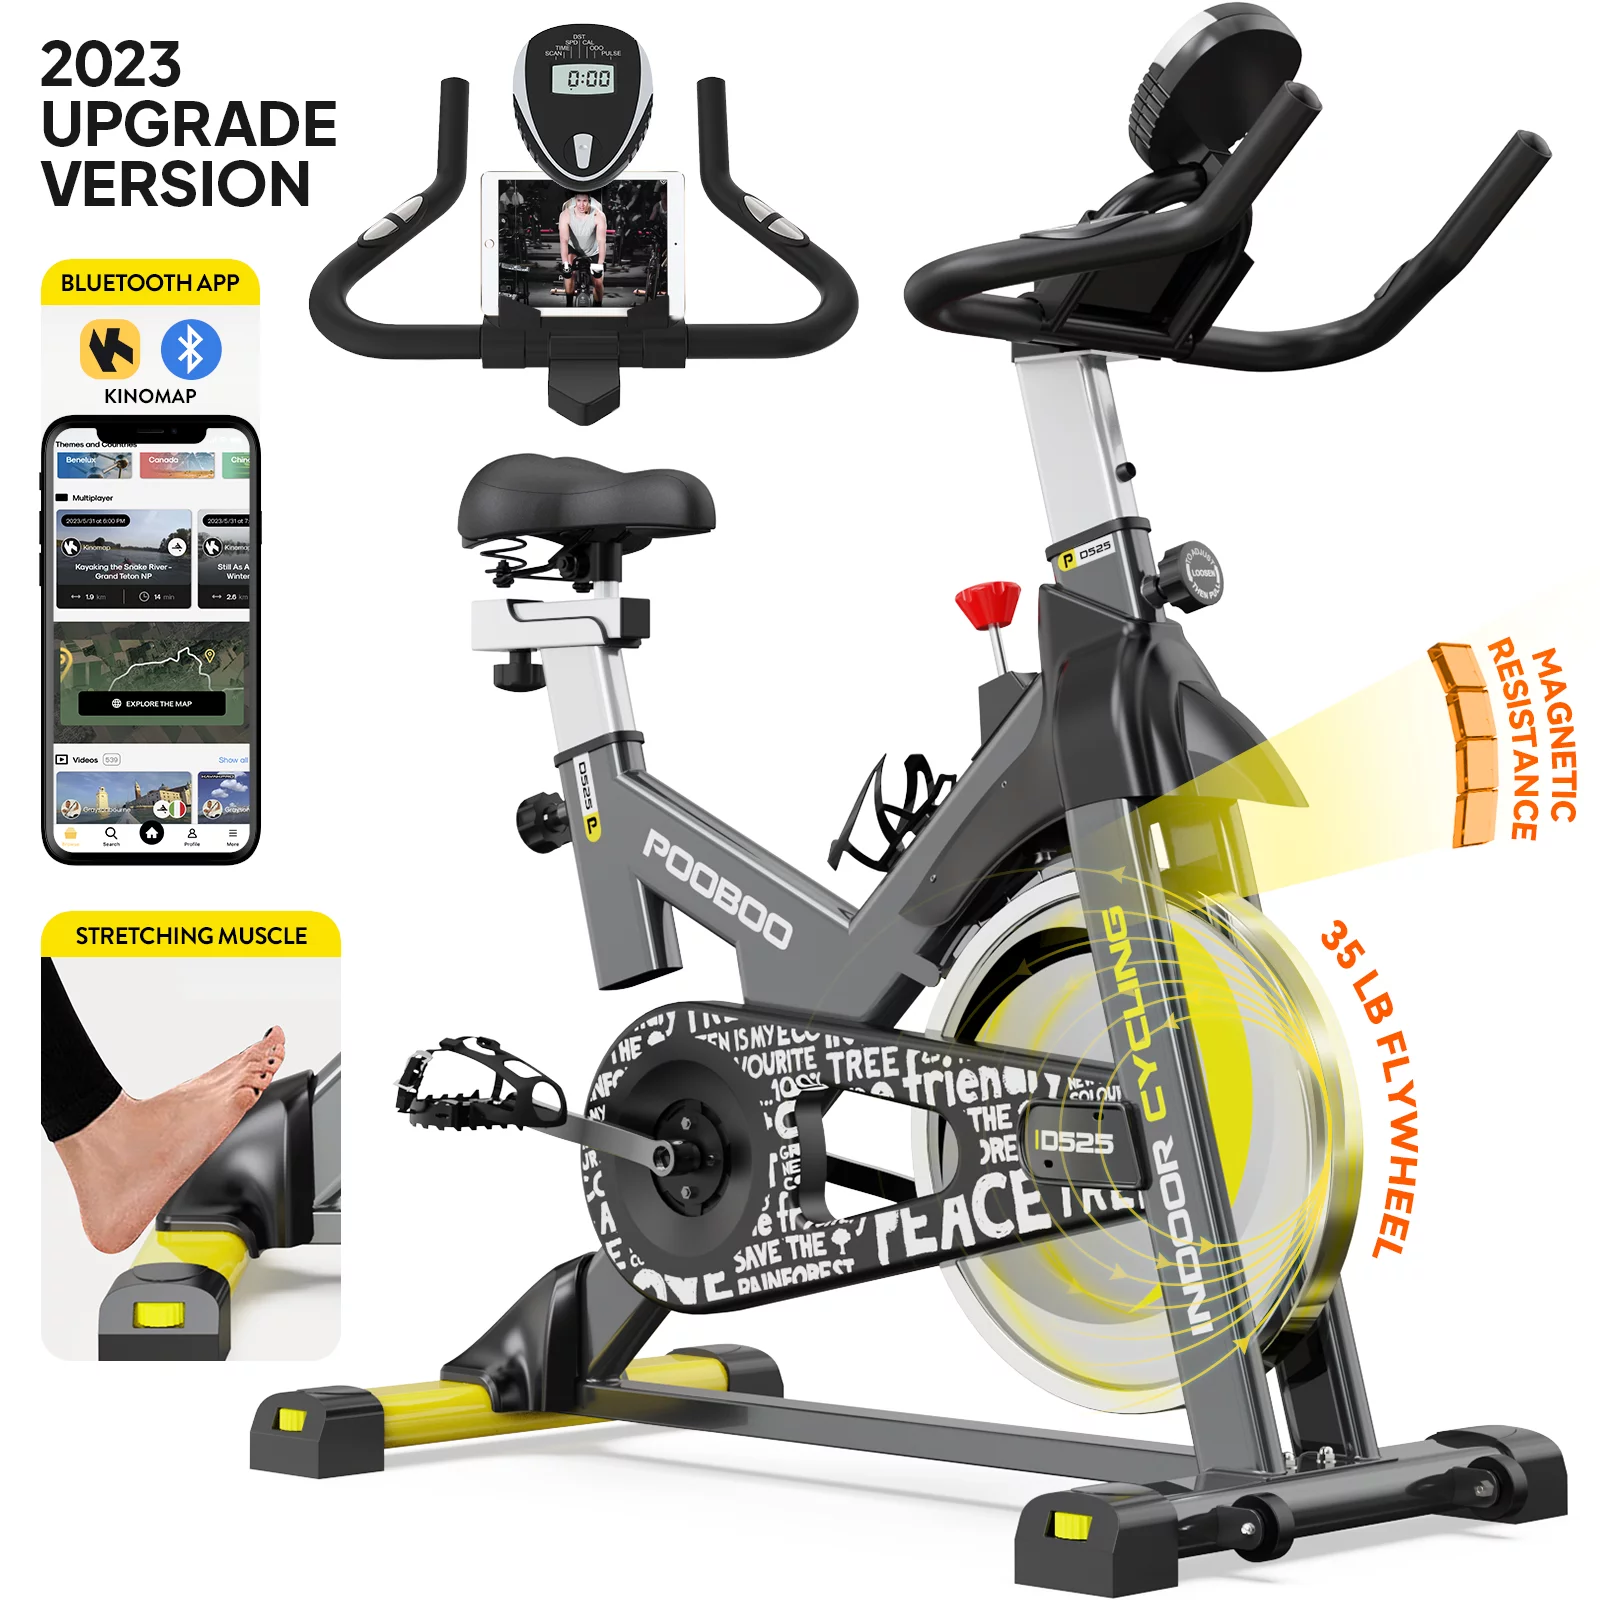 Pooboo Exercise Bike Stationary Bluetooth Indoor Cycling Bike Bicycle Magnetic Resistance Fitness Cycle Cardio Sport Upright Cycling Quiet Workout 35 Lbs Flywheel Max Weight 330 Lbs